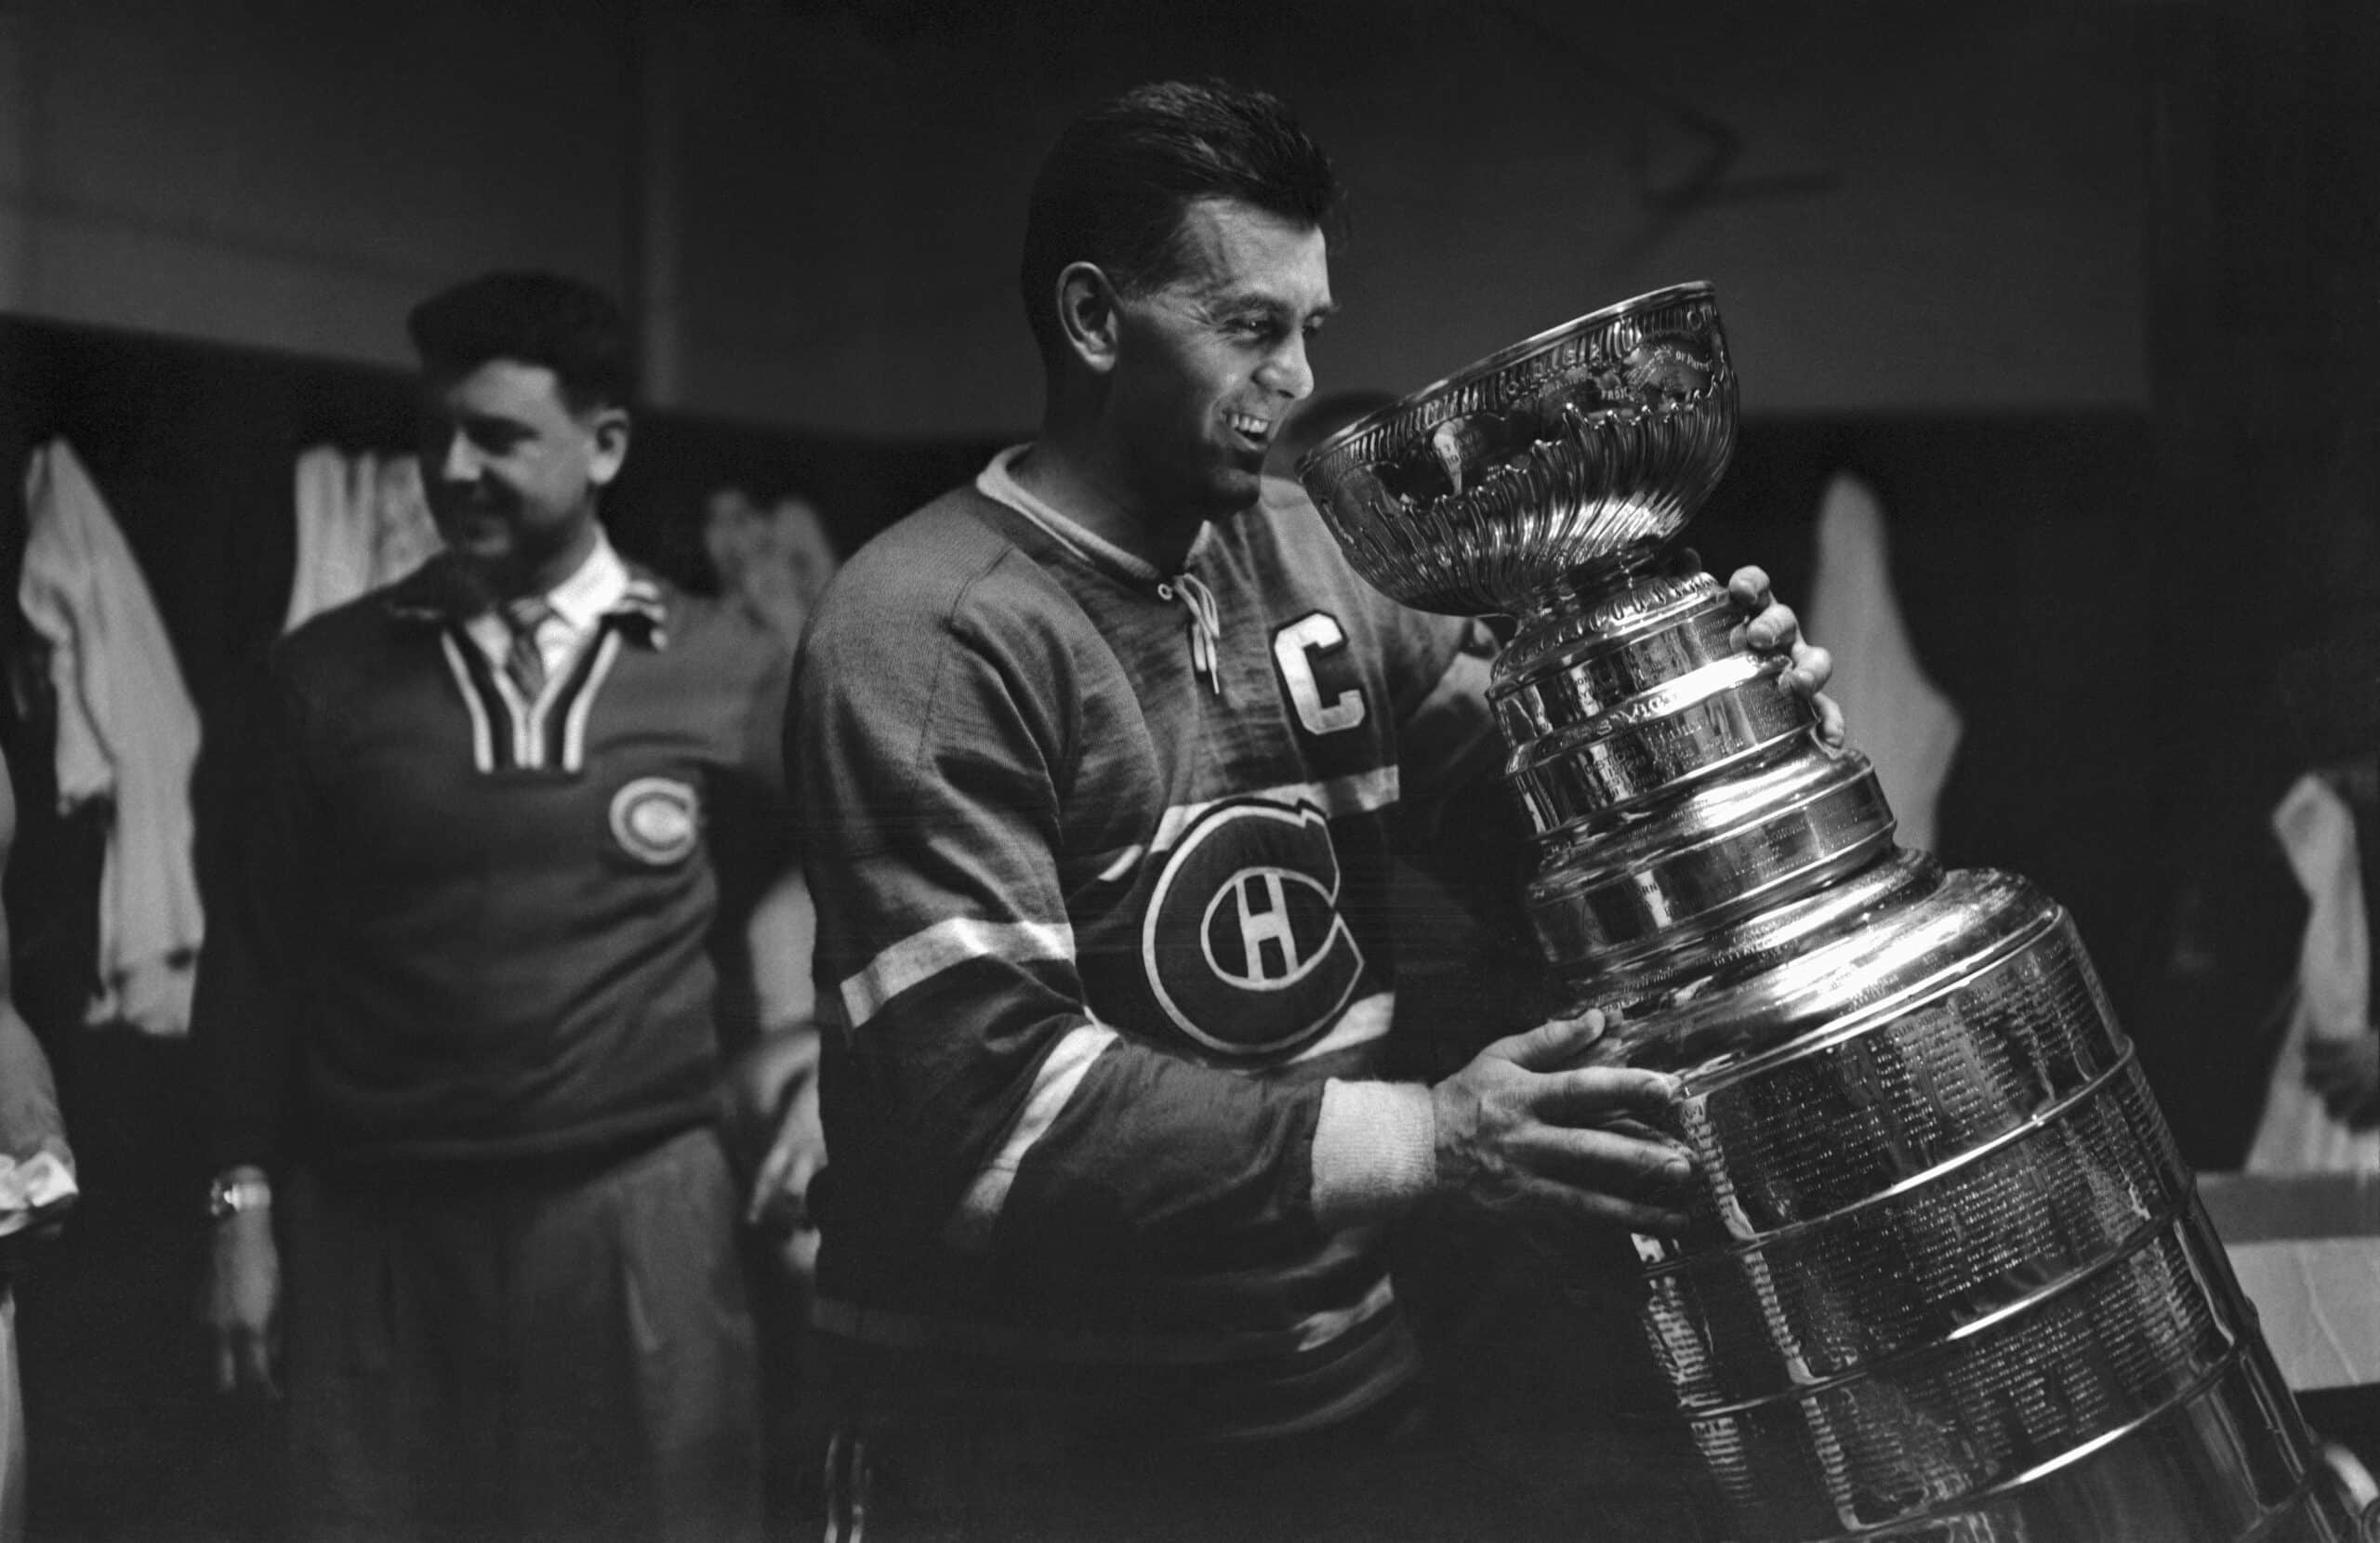 (Original Caption) Maurice "Rocket" Richard, star of the Montreal Canadiens, gets acquainted with the Stanley Cup here April 20th. The Canadiens won the cup by beating the Boston Bruins in the playoffs, 5-3.